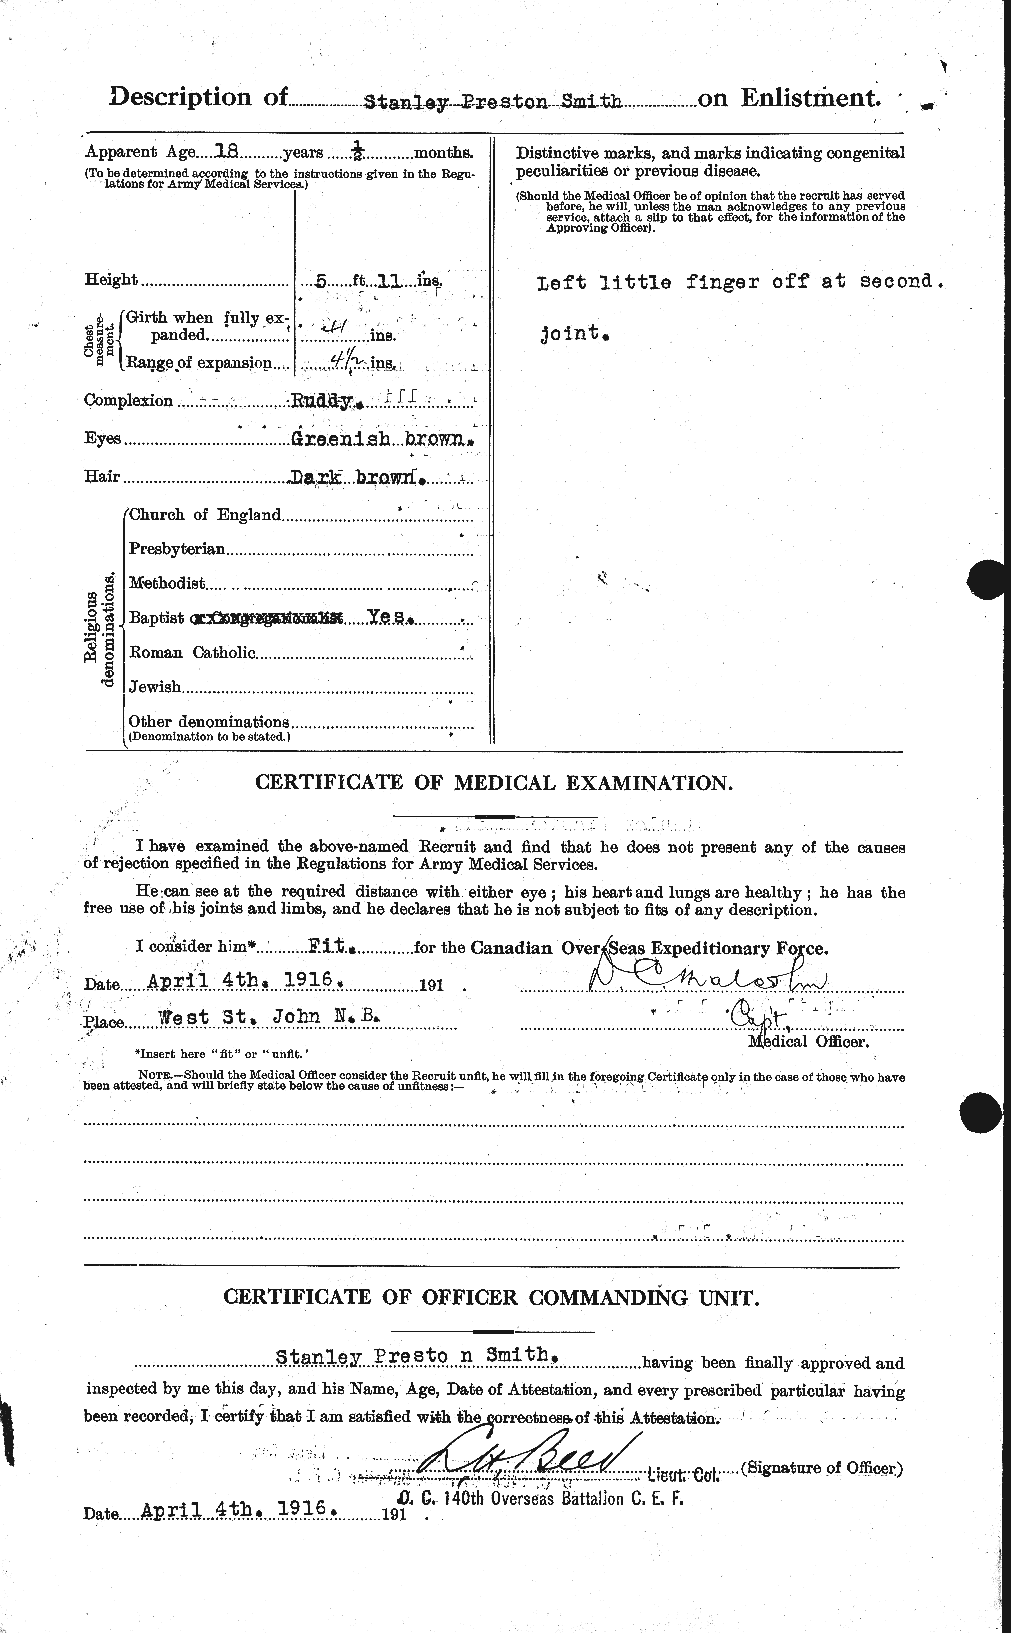 Personnel Records of the First World War - CEF 107380b